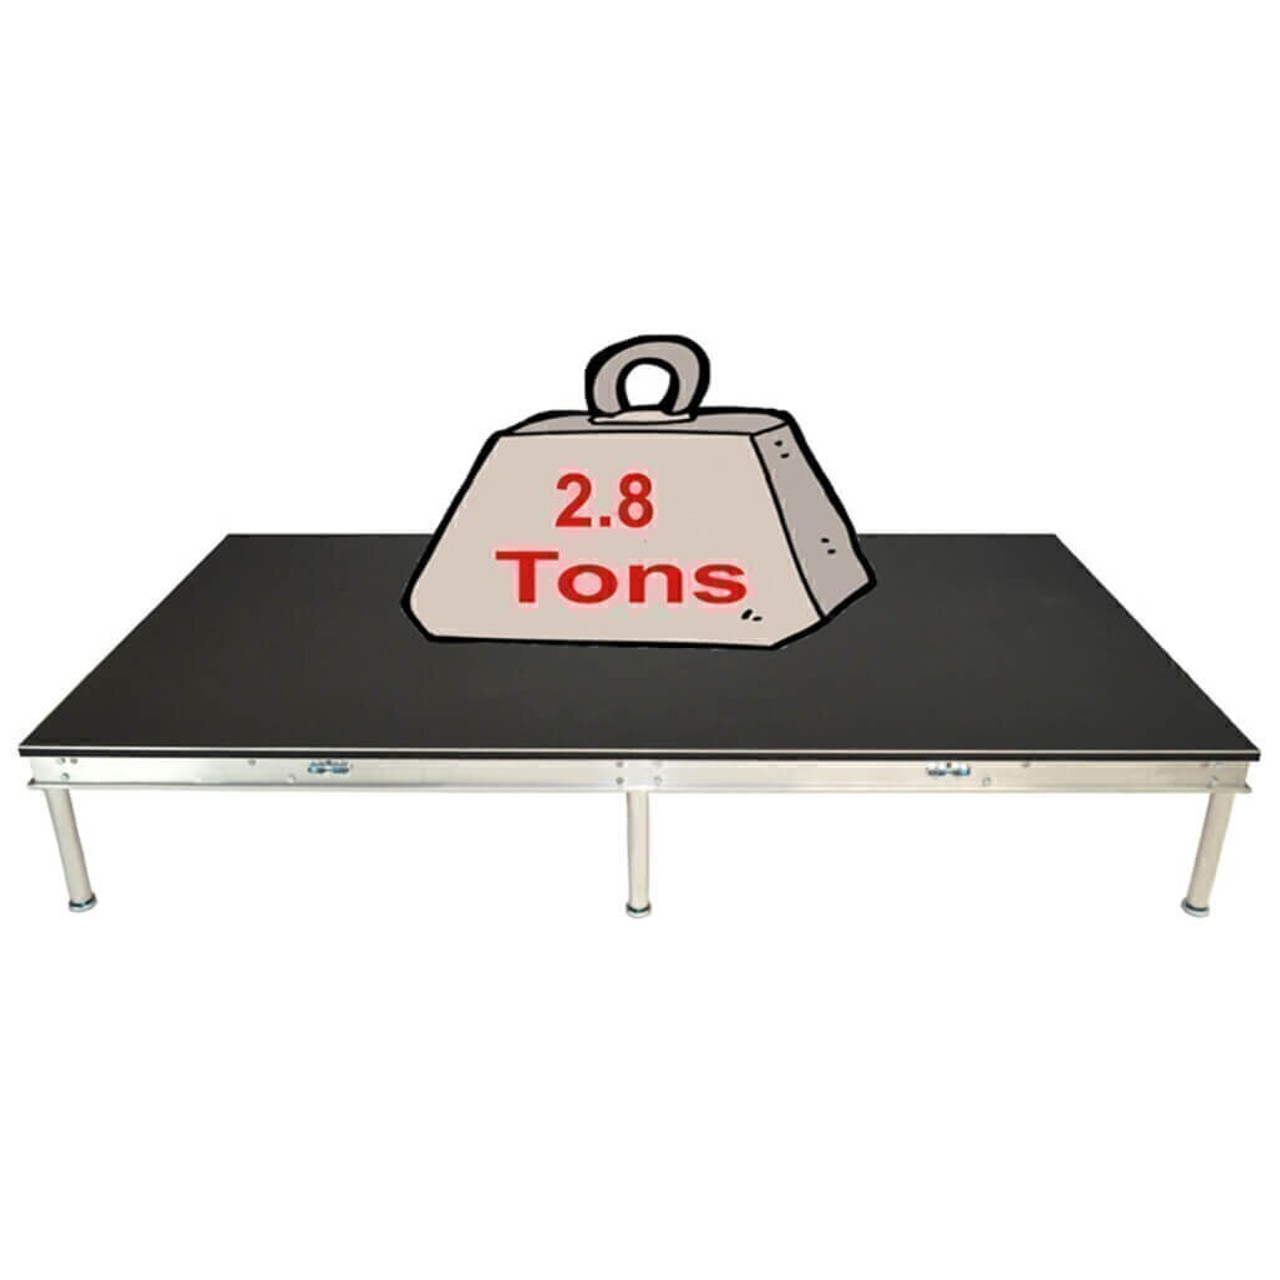 Top rated Quik Stage 12' x 36' High Portable Stage Package with Black Polyvinyl Non-Skid Surface. Additional Heights and Surfaces Available - Holds 2.8 tons per 4 x 8 or 1.4 tons per 4 x 4 when spread out evenly